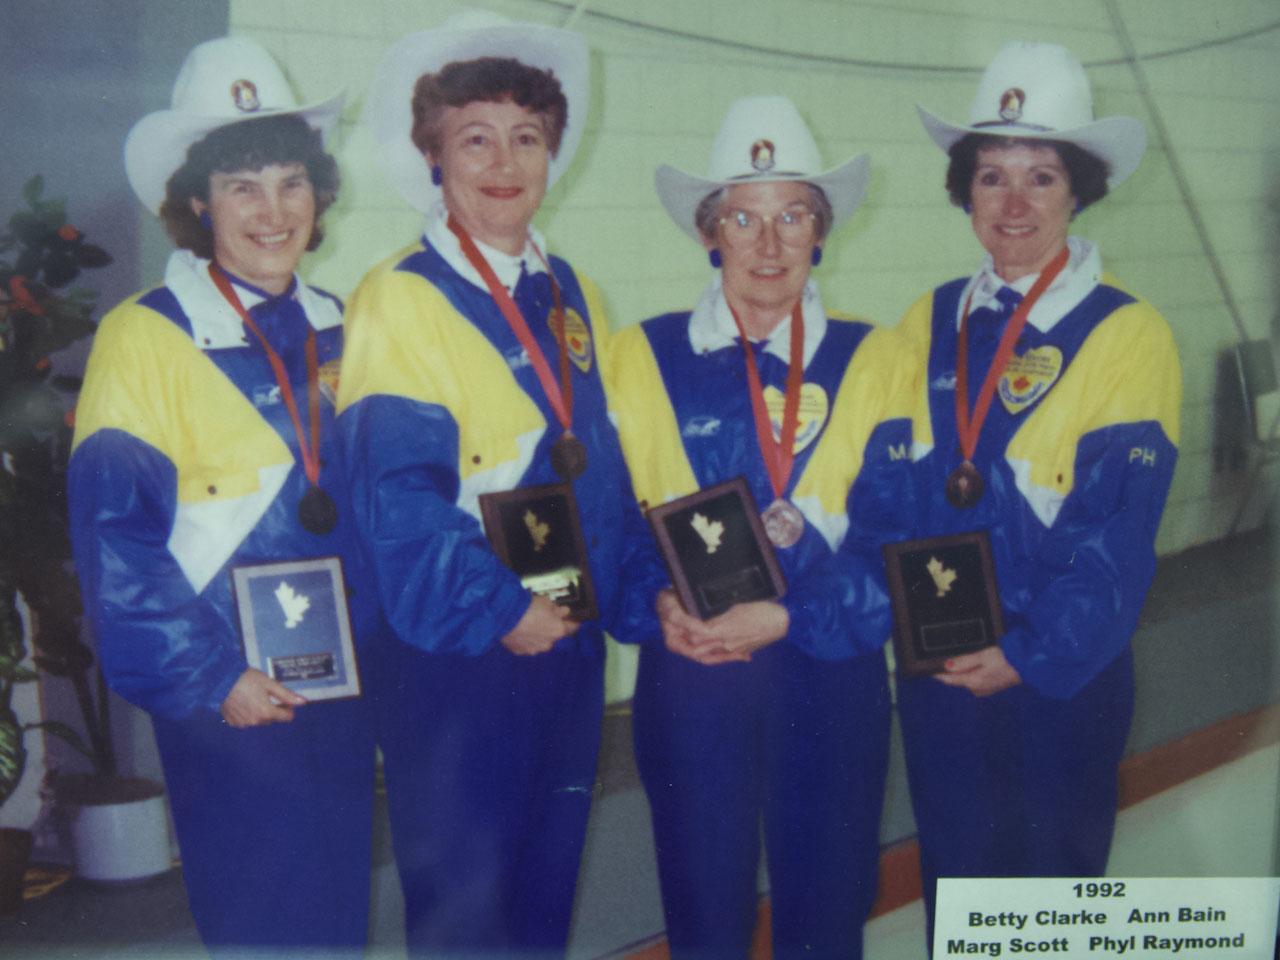 Chestermere’s-Other-Curling-Champion--Betty-Clarke-1992-Provincial-Seniors-Champs